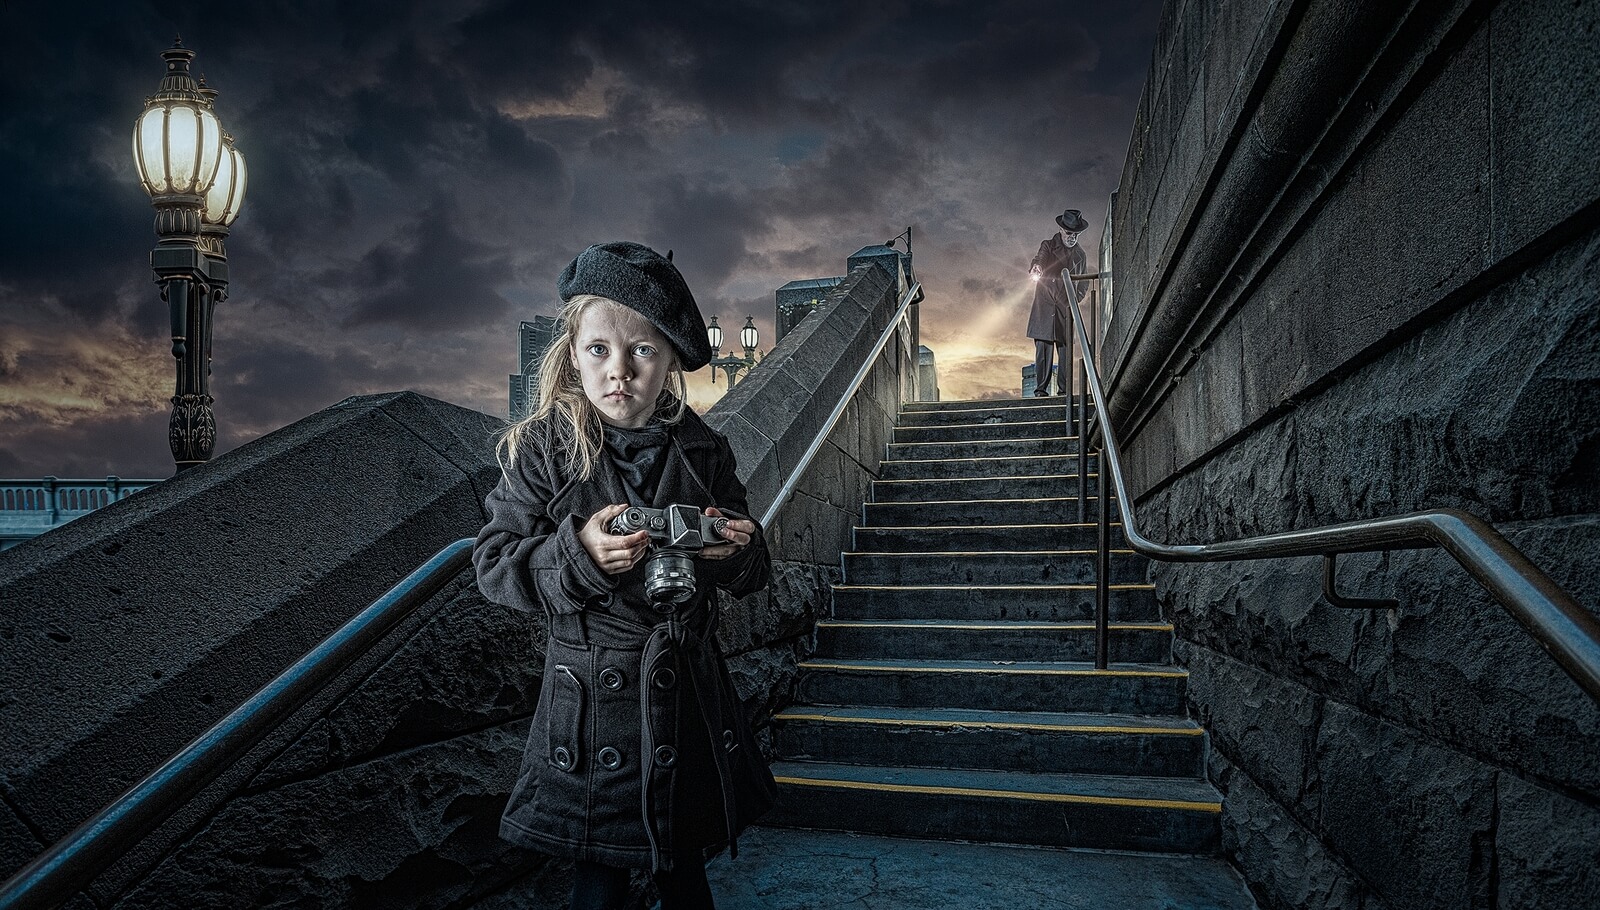 The adventures of young Matilda by Adrian Donoghue